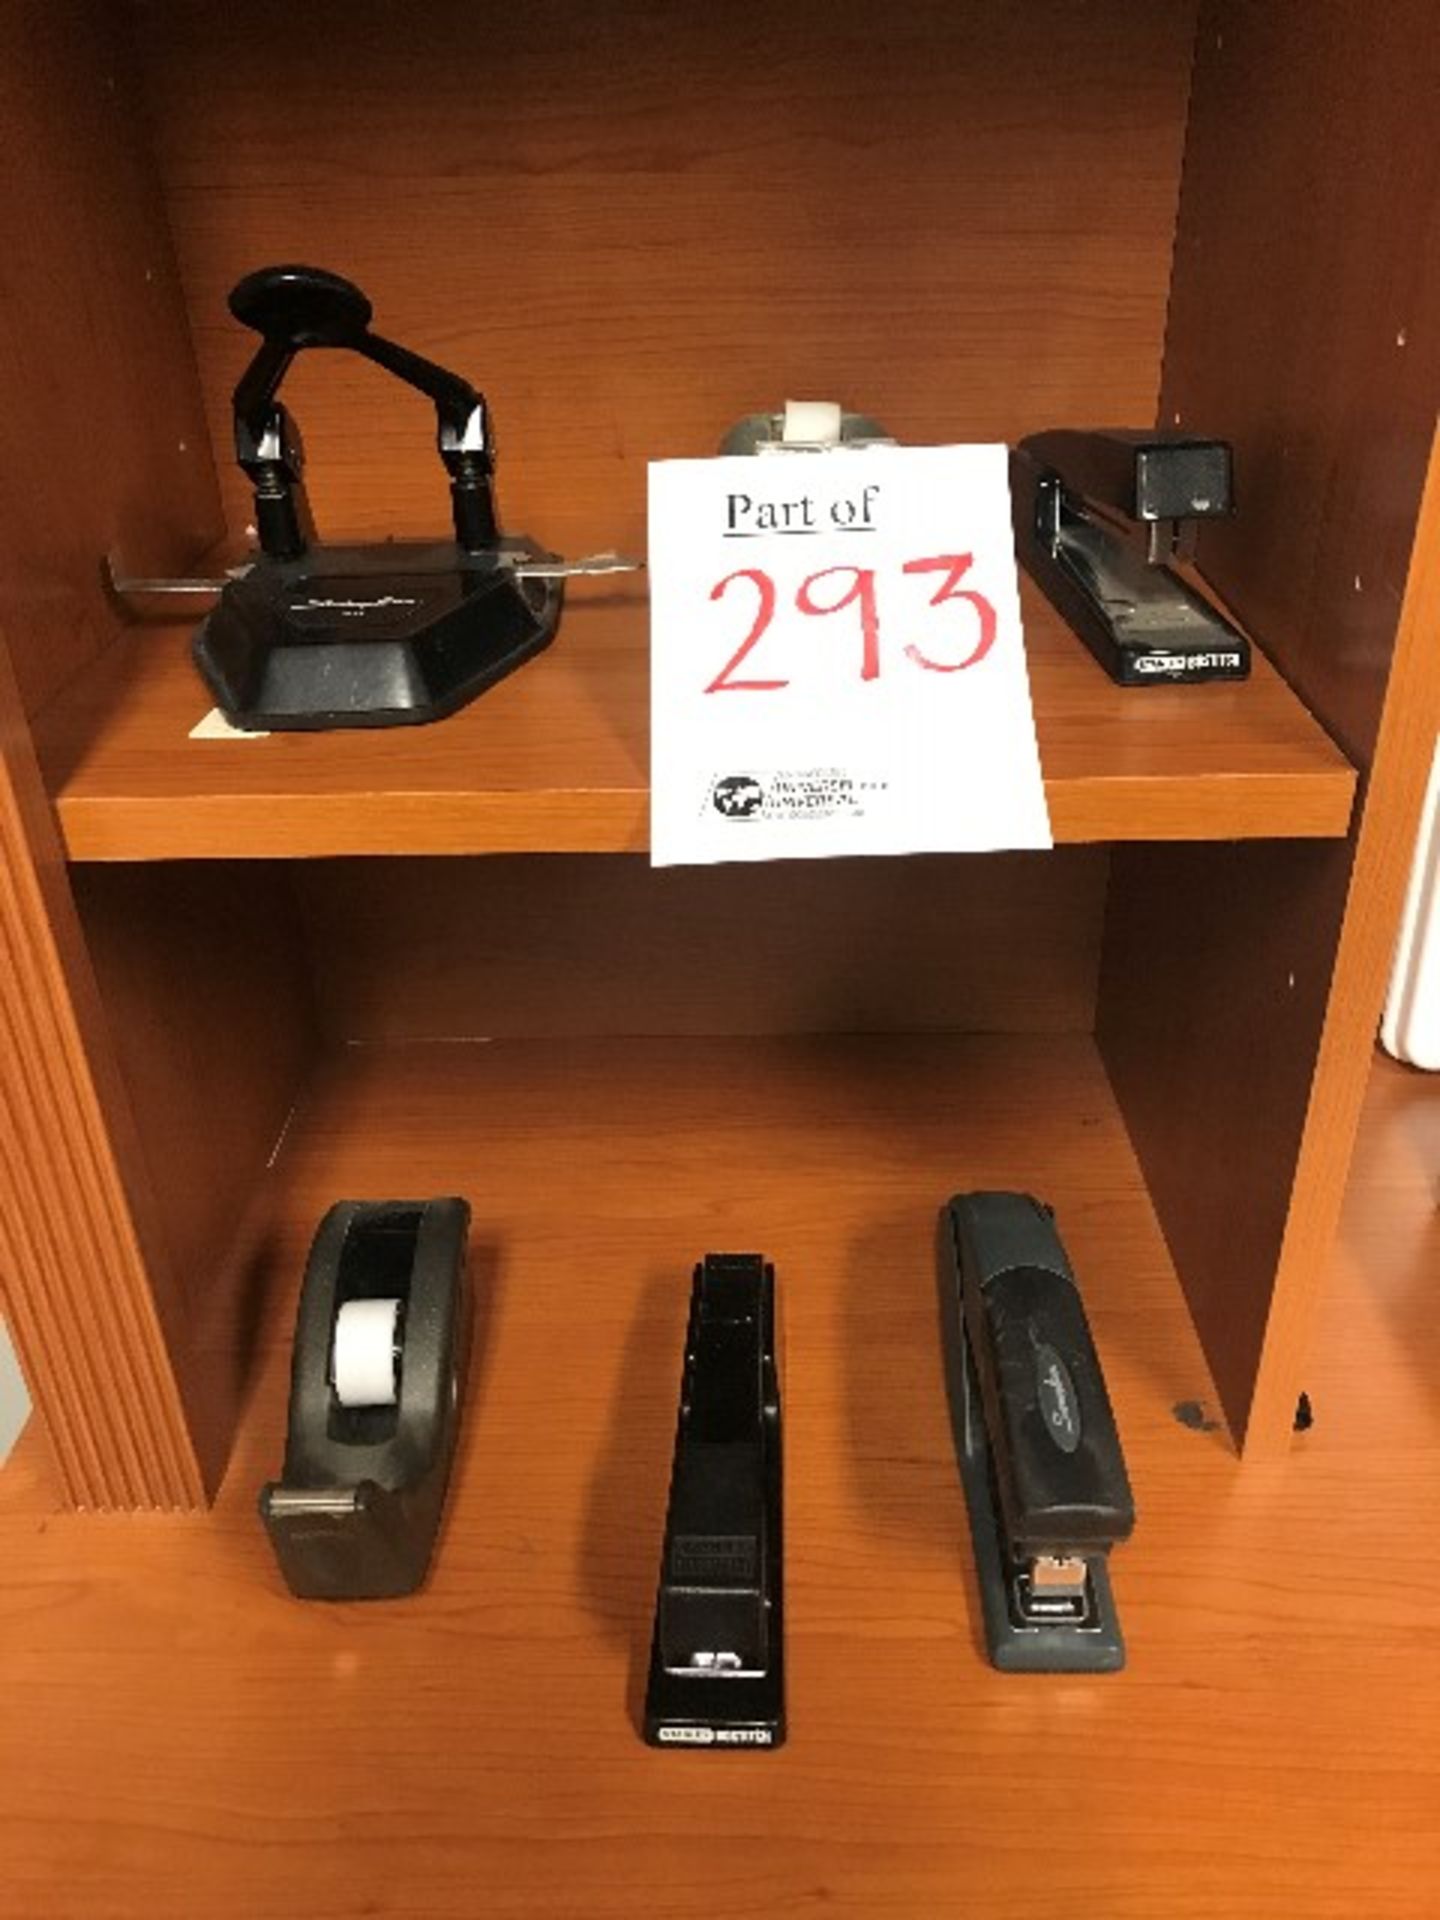 LOT: Assorted staplers,hole punchers,tape dispensers,etc...,15pcs - Image 2 of 2